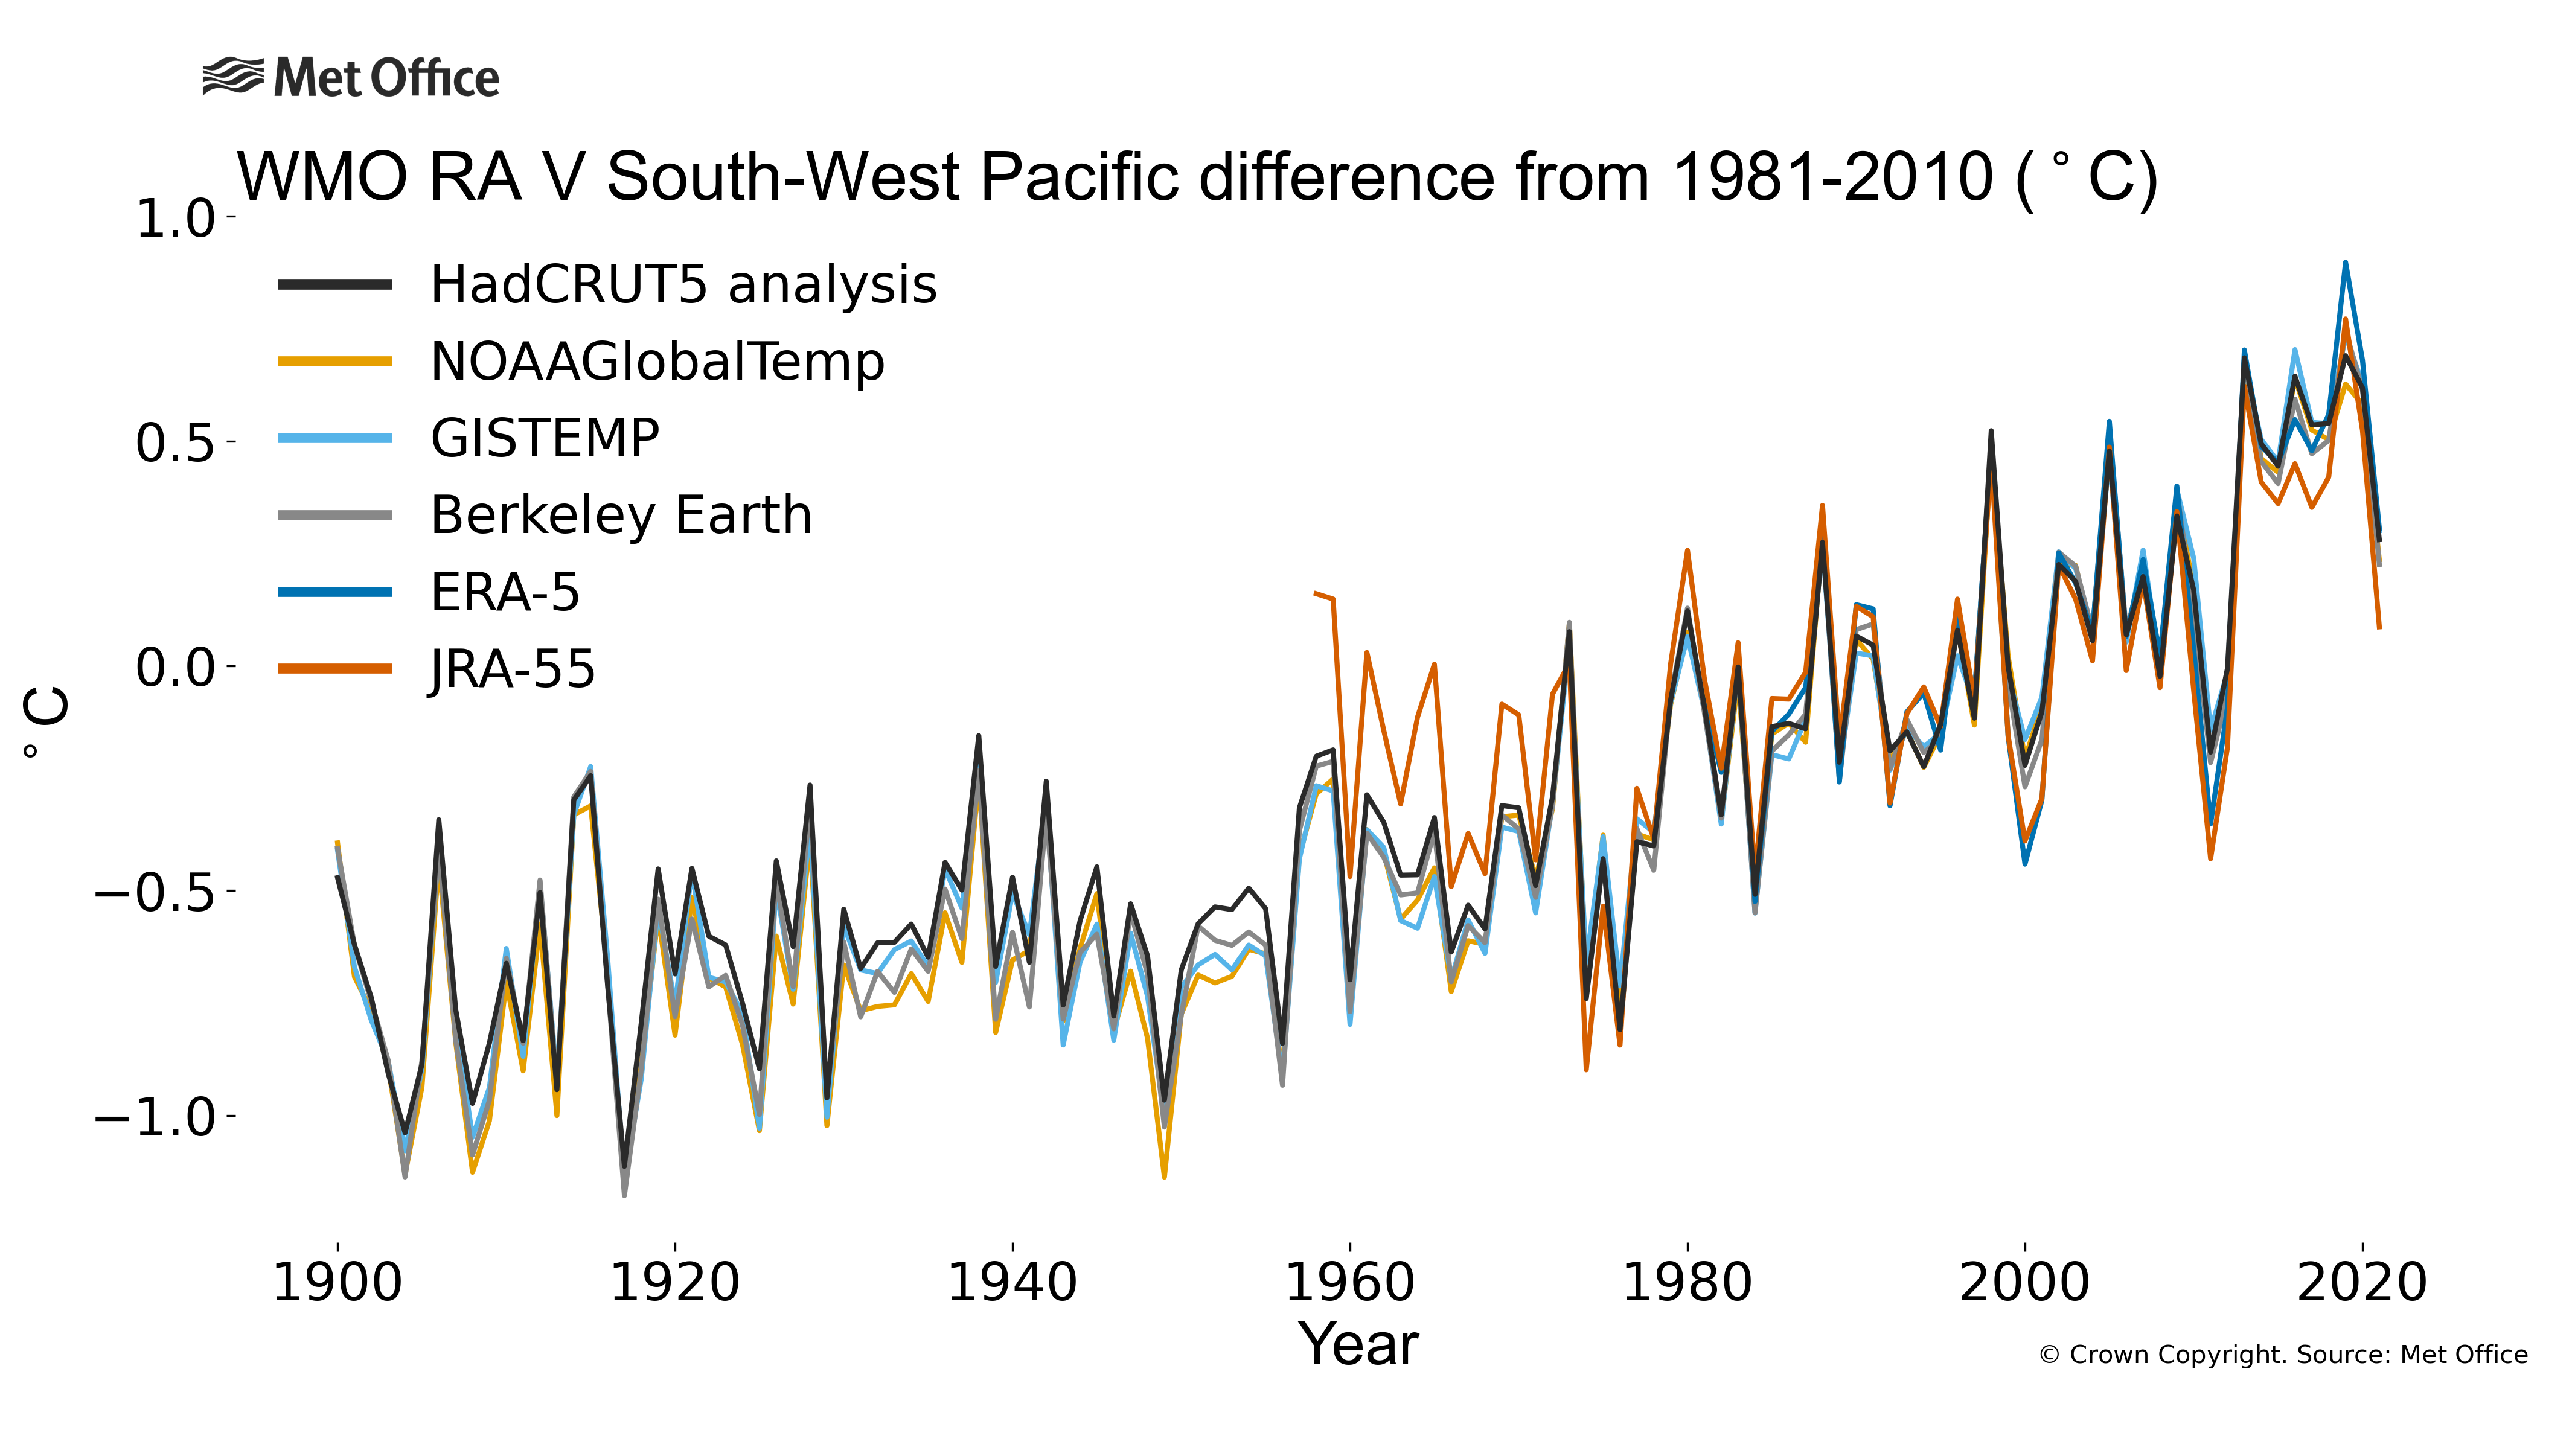 
The plot shows annual average temperature anomalies (relative to 1981-2010) for WMO RA V - South-West Pacific. Data are from six different data sets: HadCRUT5, NOAAGlobalTemp, GISTEMP, Berkeley Earth, ERA5 and JRA55.
